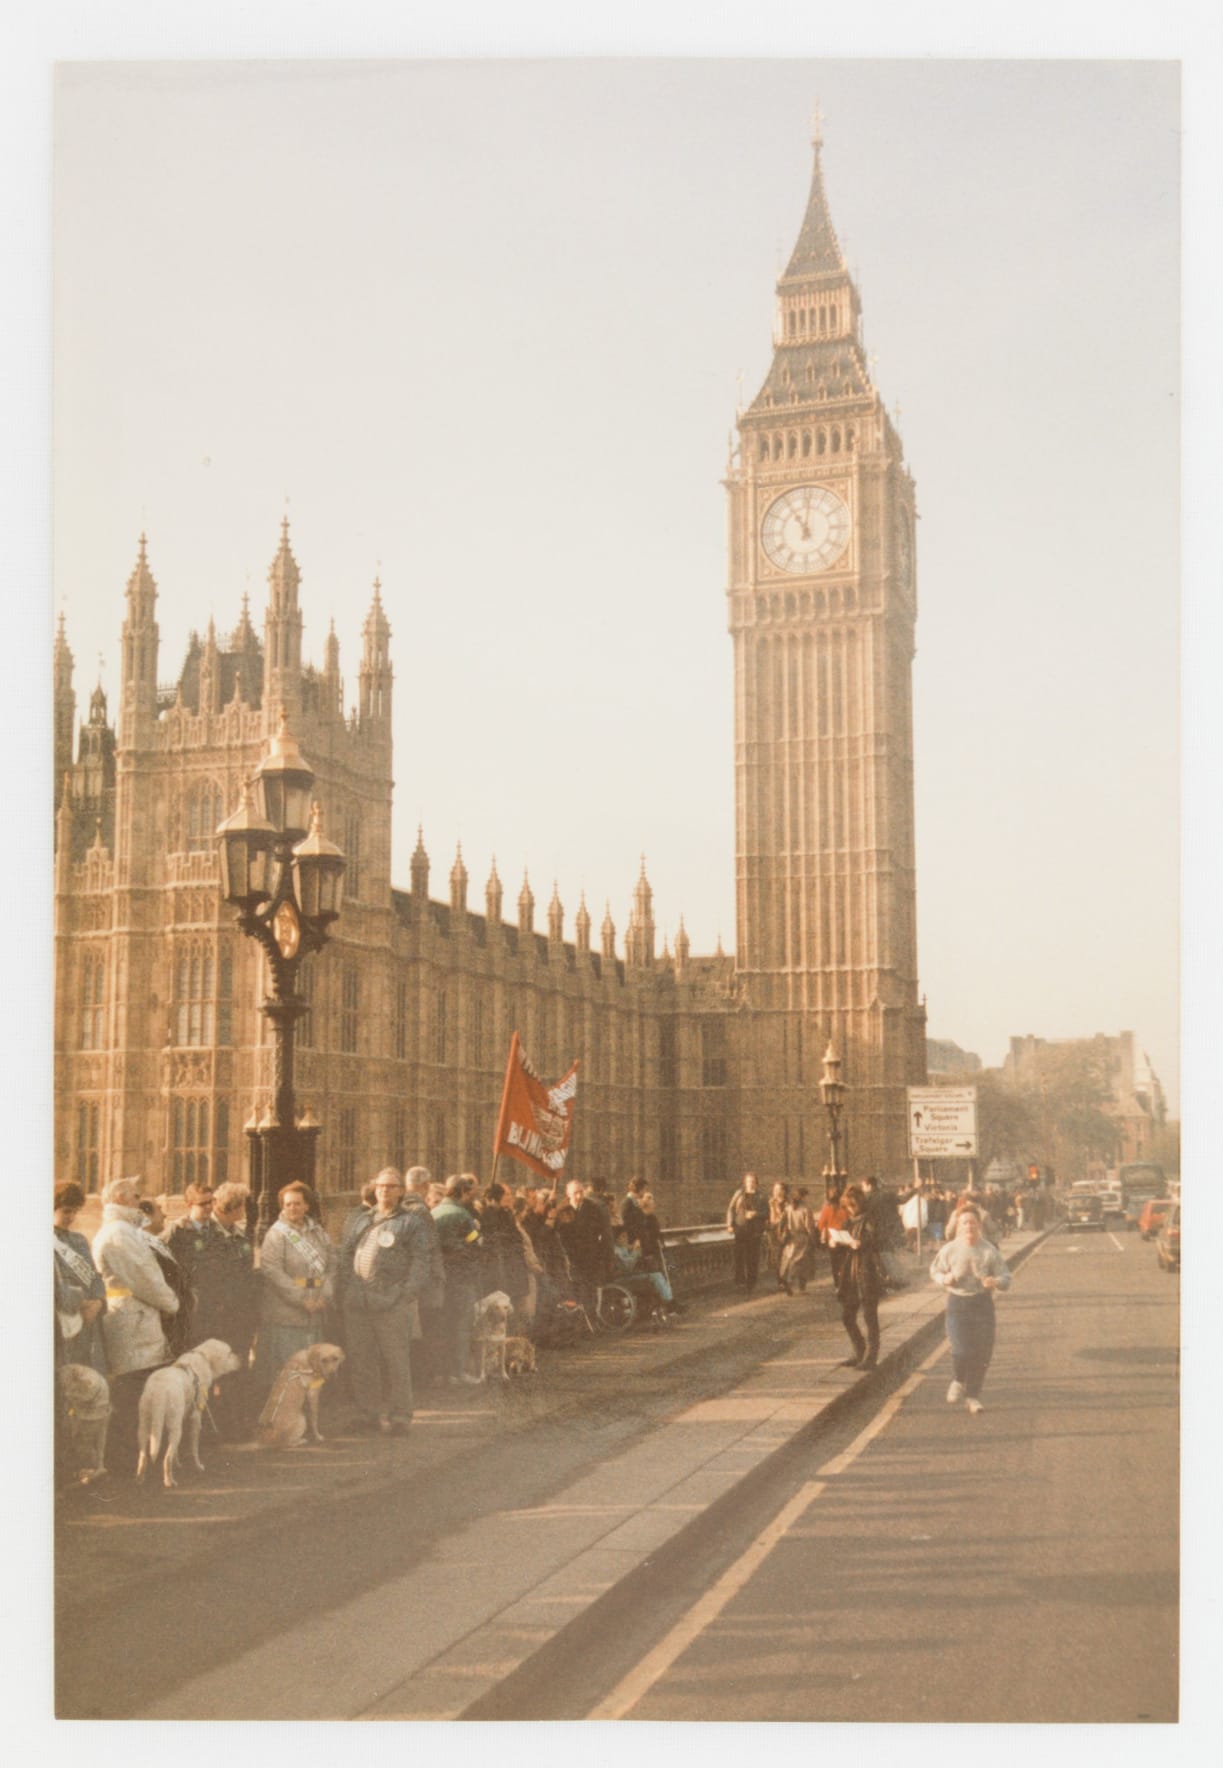 An old photograph taken on a London bridge, in view of Big Ben and the Houses of Parliament. Protestors line the street holding signs.